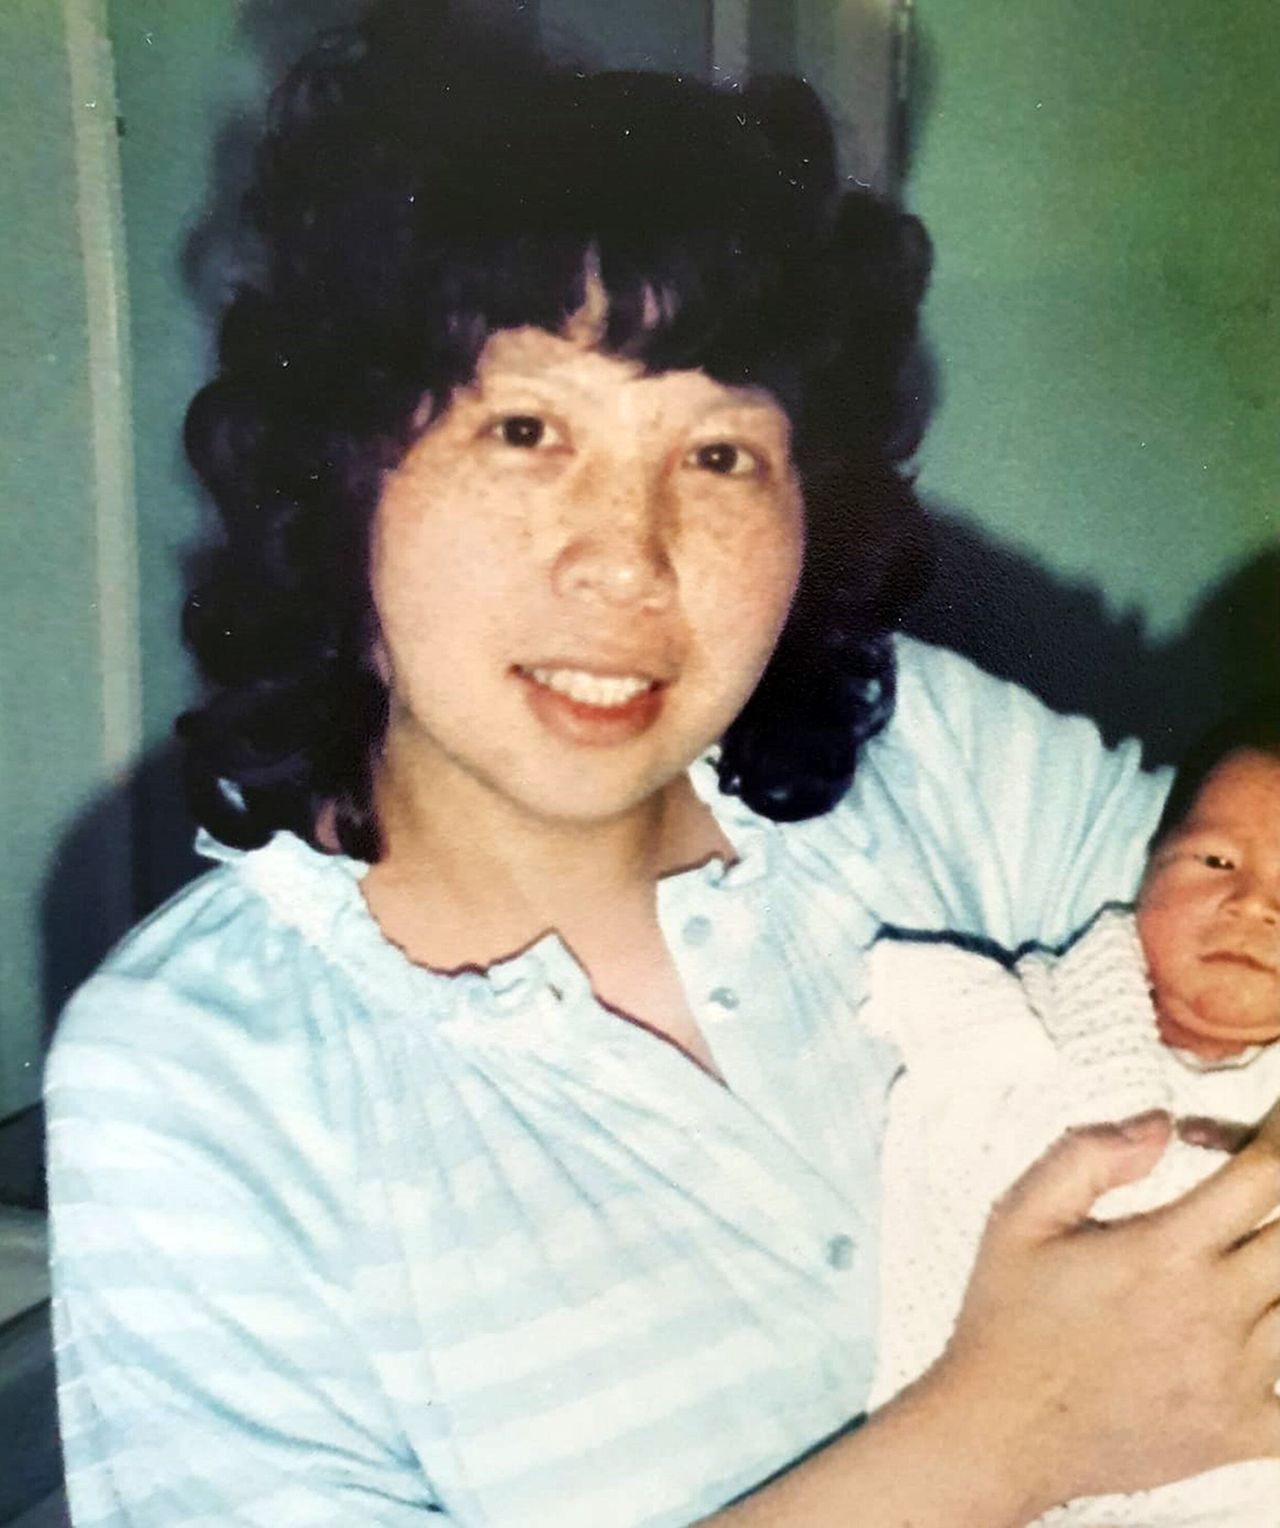 Alice Kit Tak Ong holding her daughter Melissa as a baby.